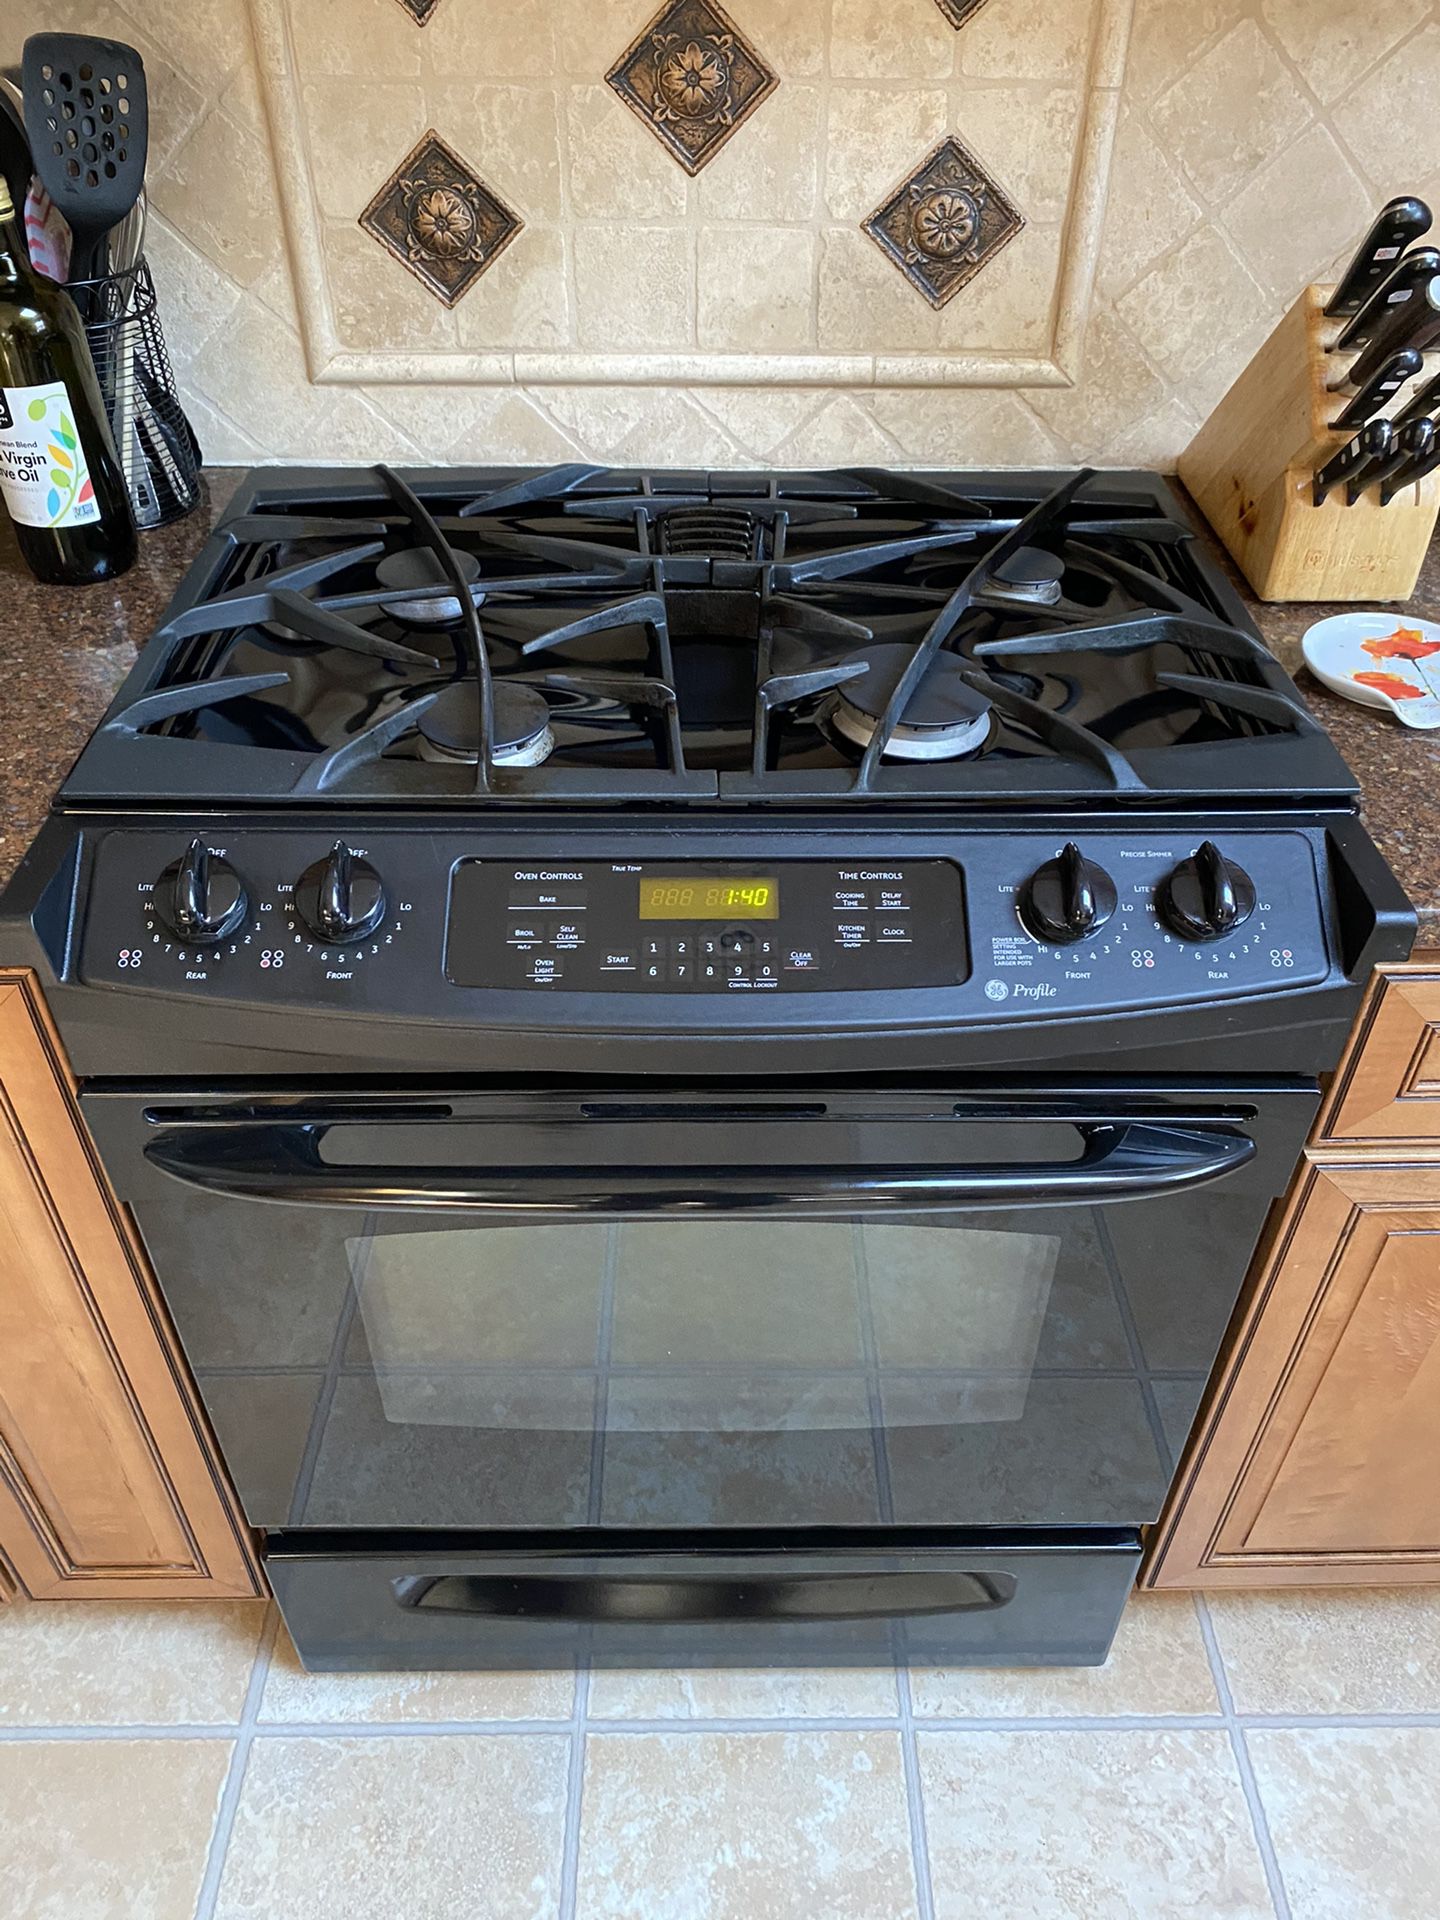 GE profile oven - Good Condition, Just Remodeling Kitchen.